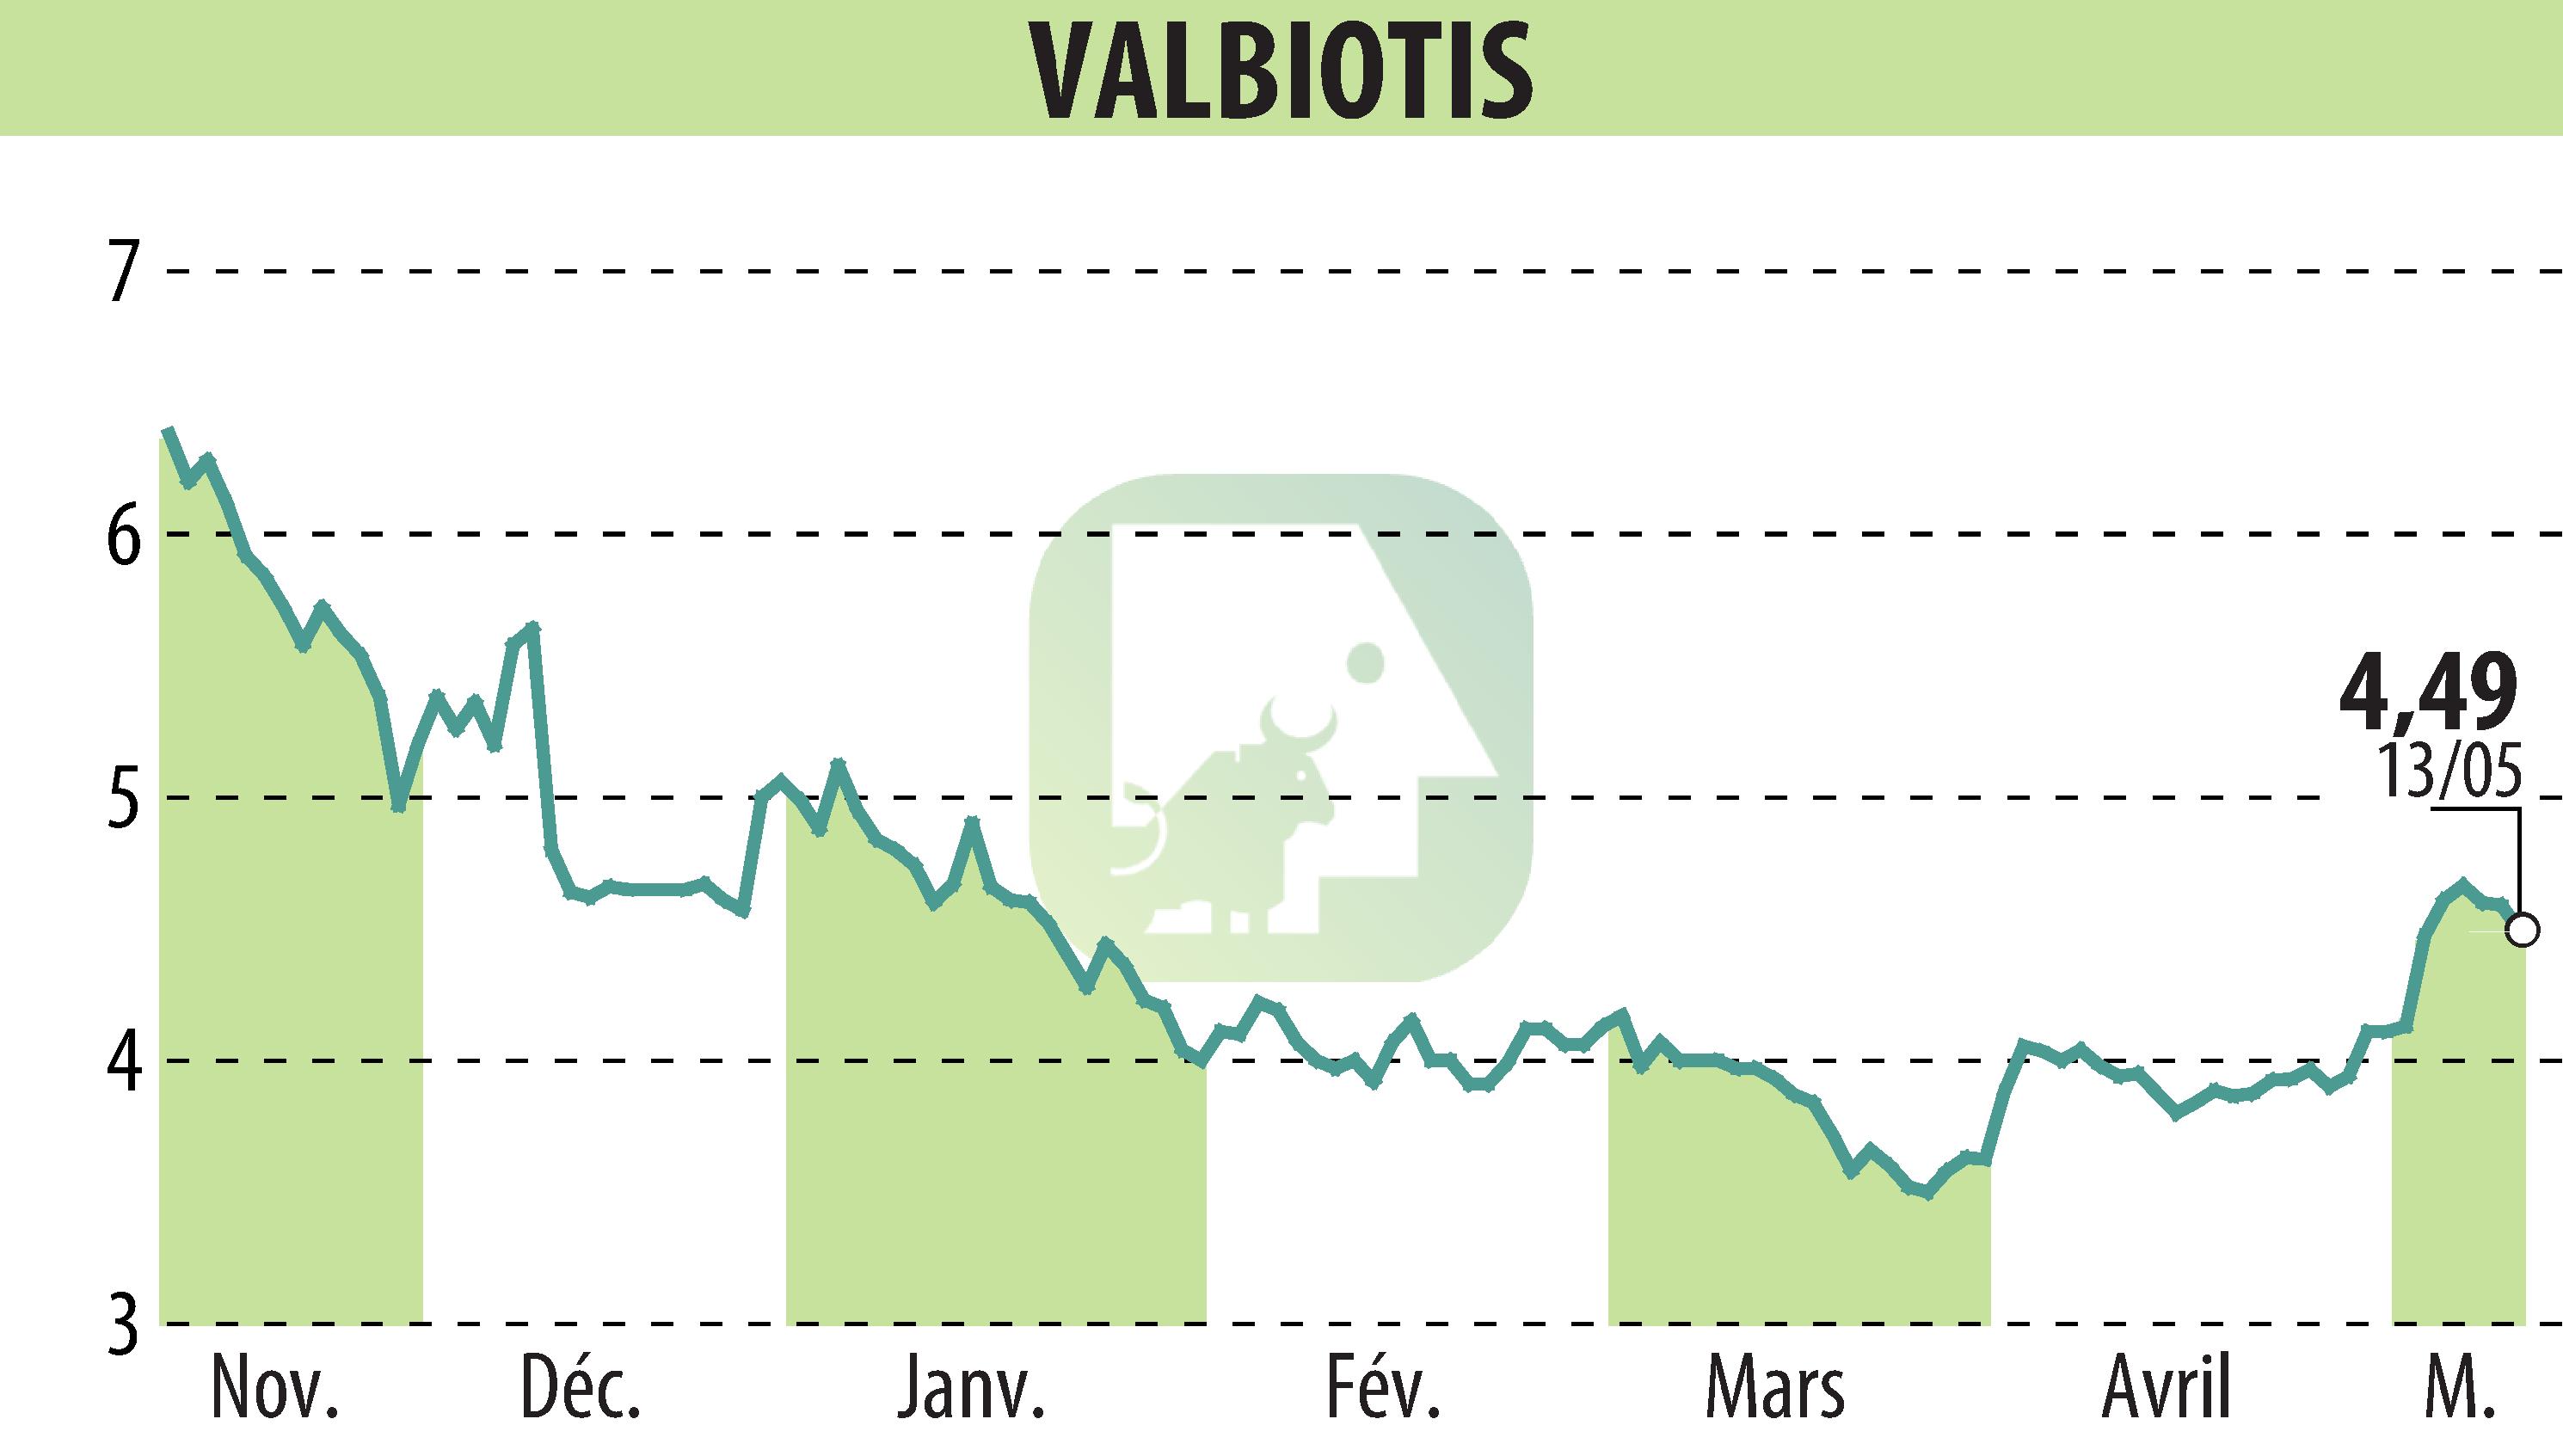 Stock price chart of VALBIOTIS (EPA:ALVAL) showing fluctuations.